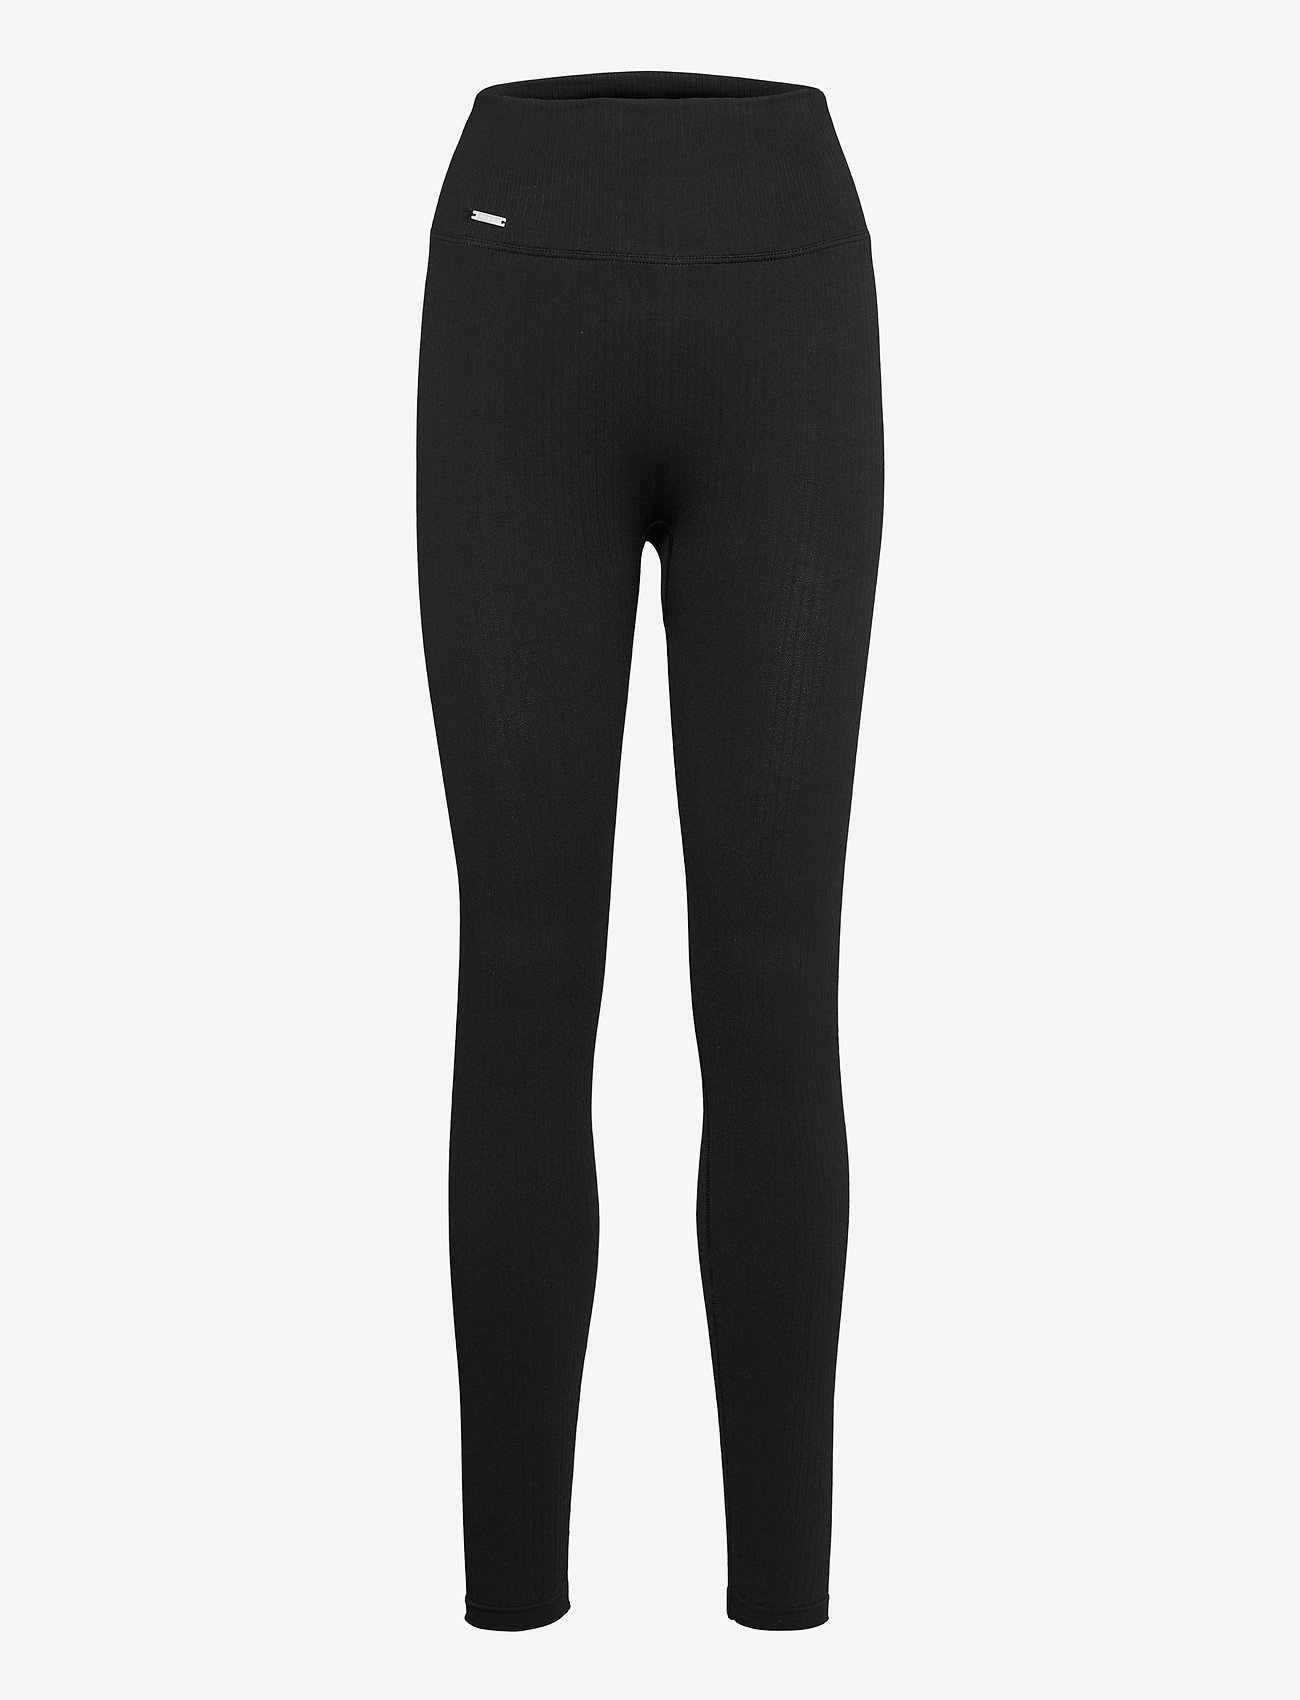 tapperhed Decrement Resistente AIM'N Ribbed Seamless Tights - Leggings & Tights | Boozt.com